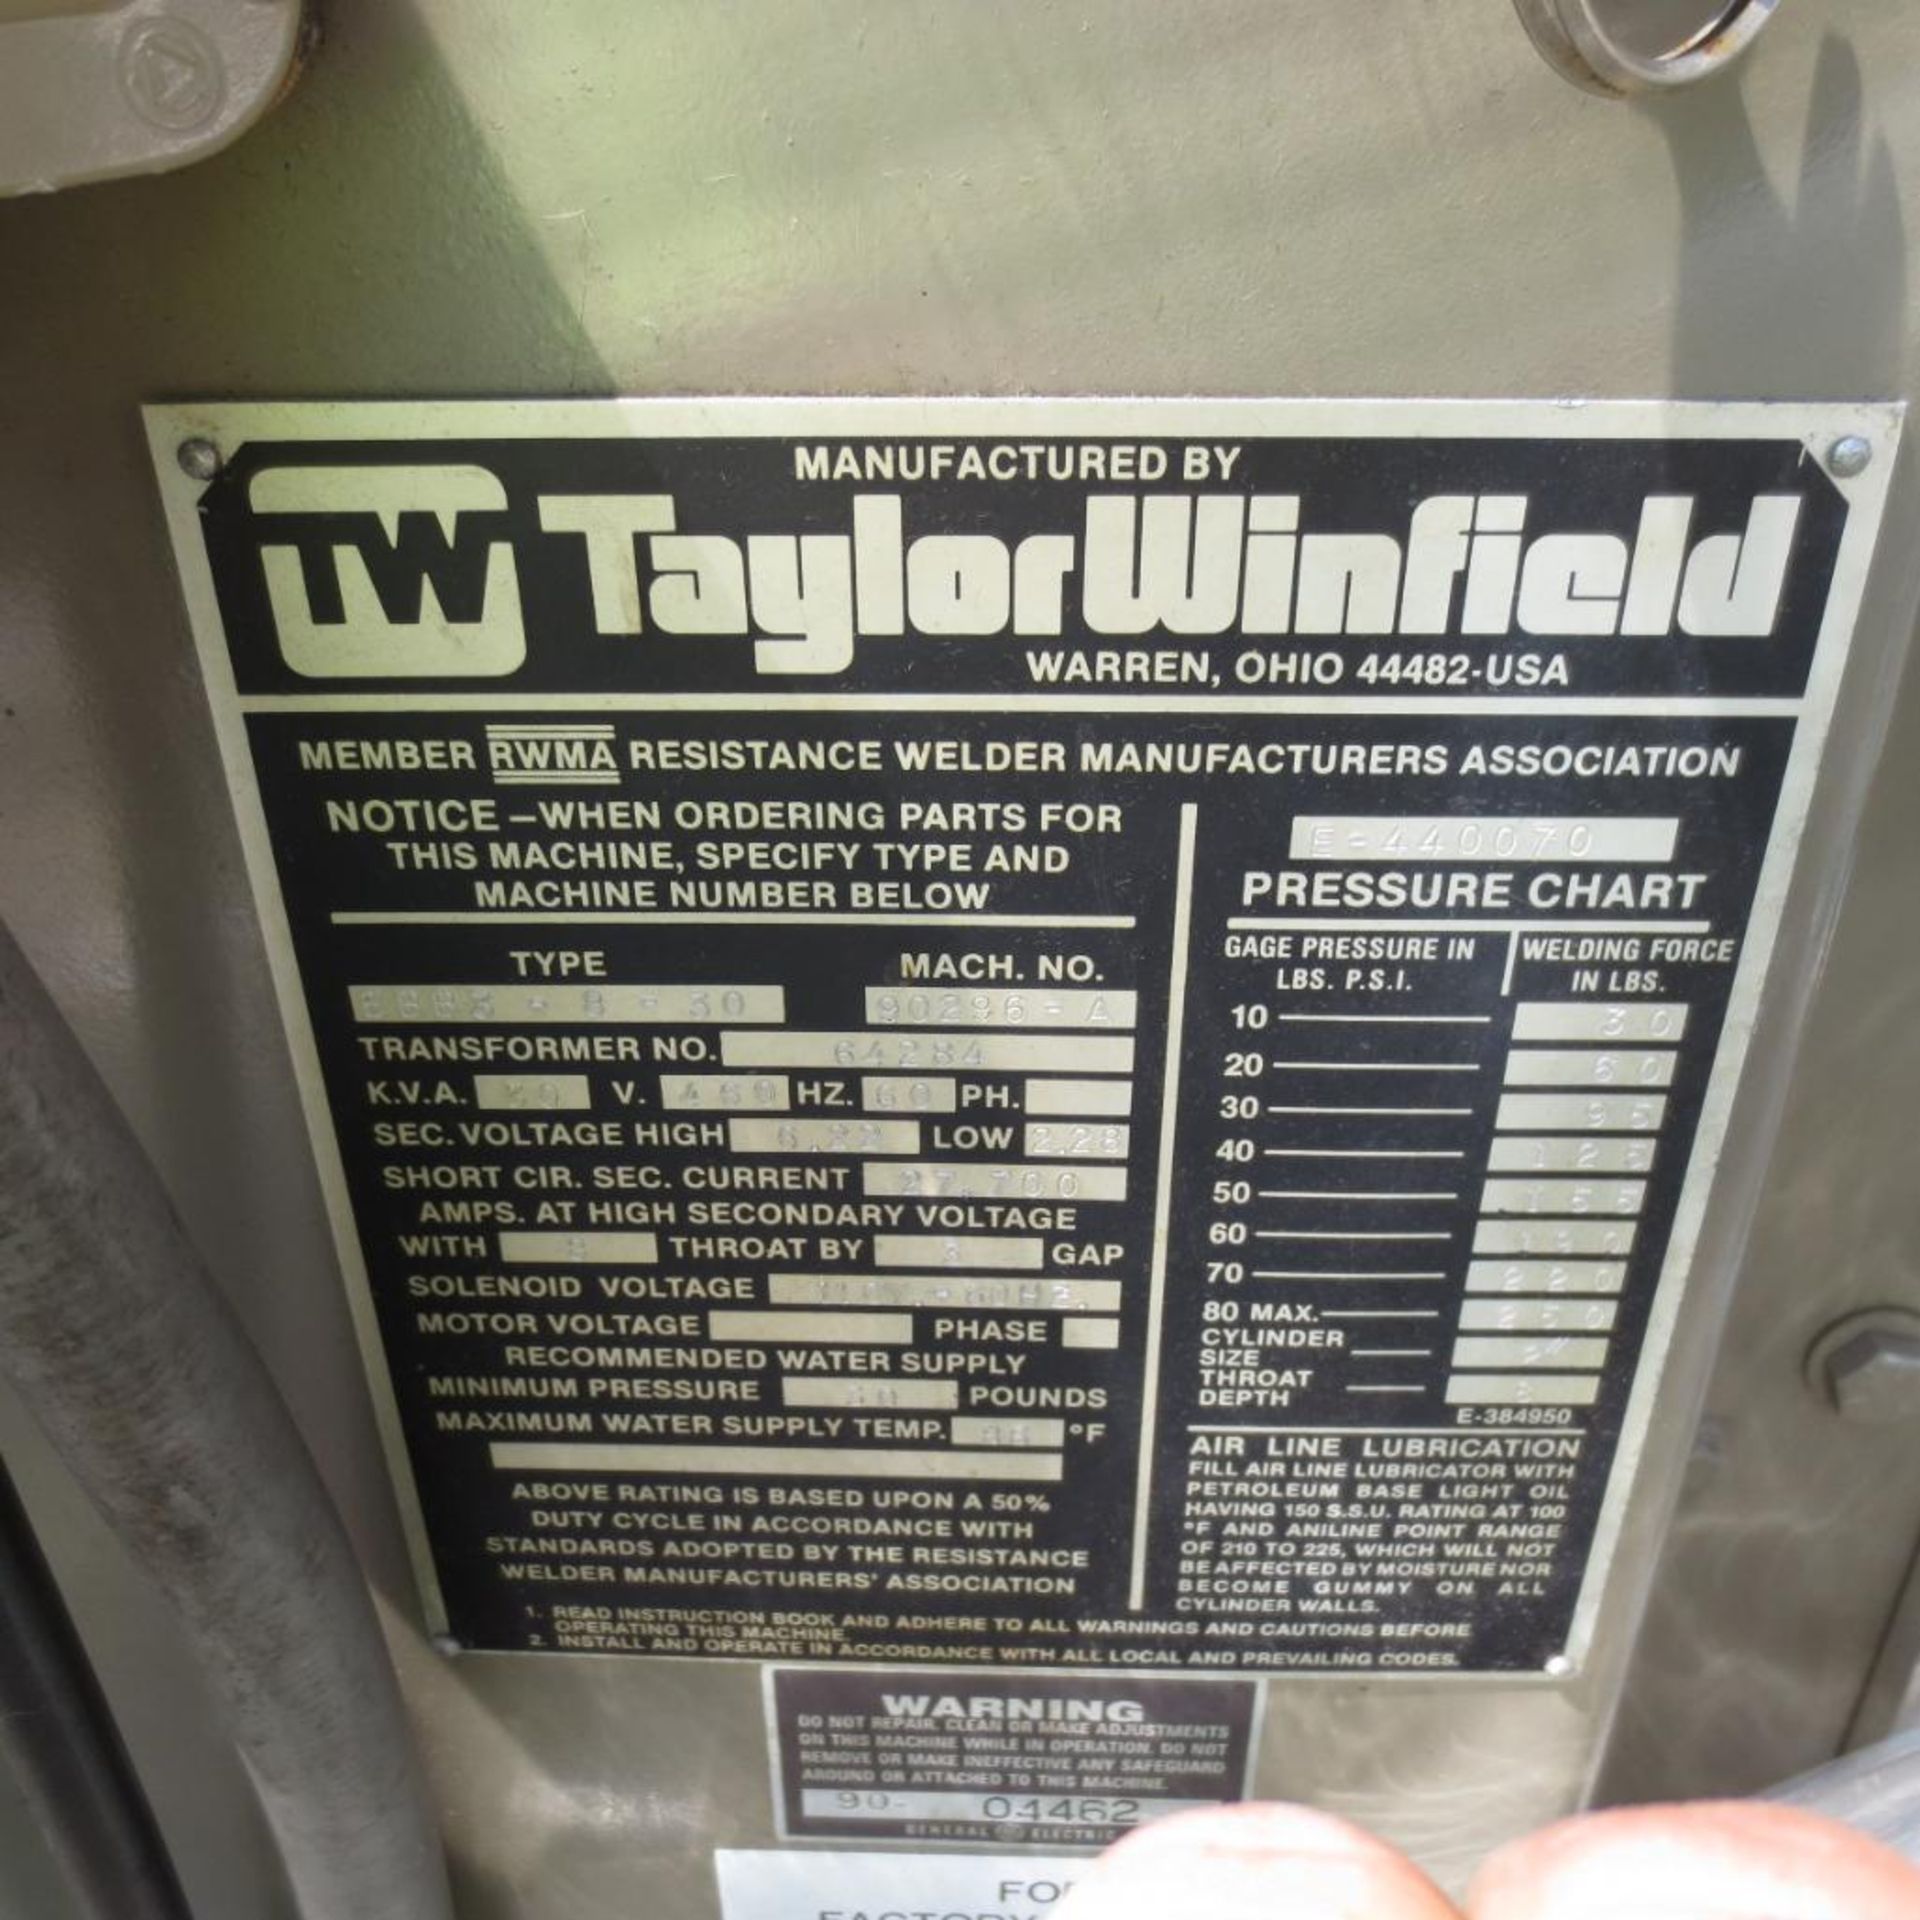 Taylor Winfield 30 KVA Type EBB3-8-30 Spot Welder S/N: 90296-A, 30 KVA located at 707 Burlington Ave - Image 3 of 5